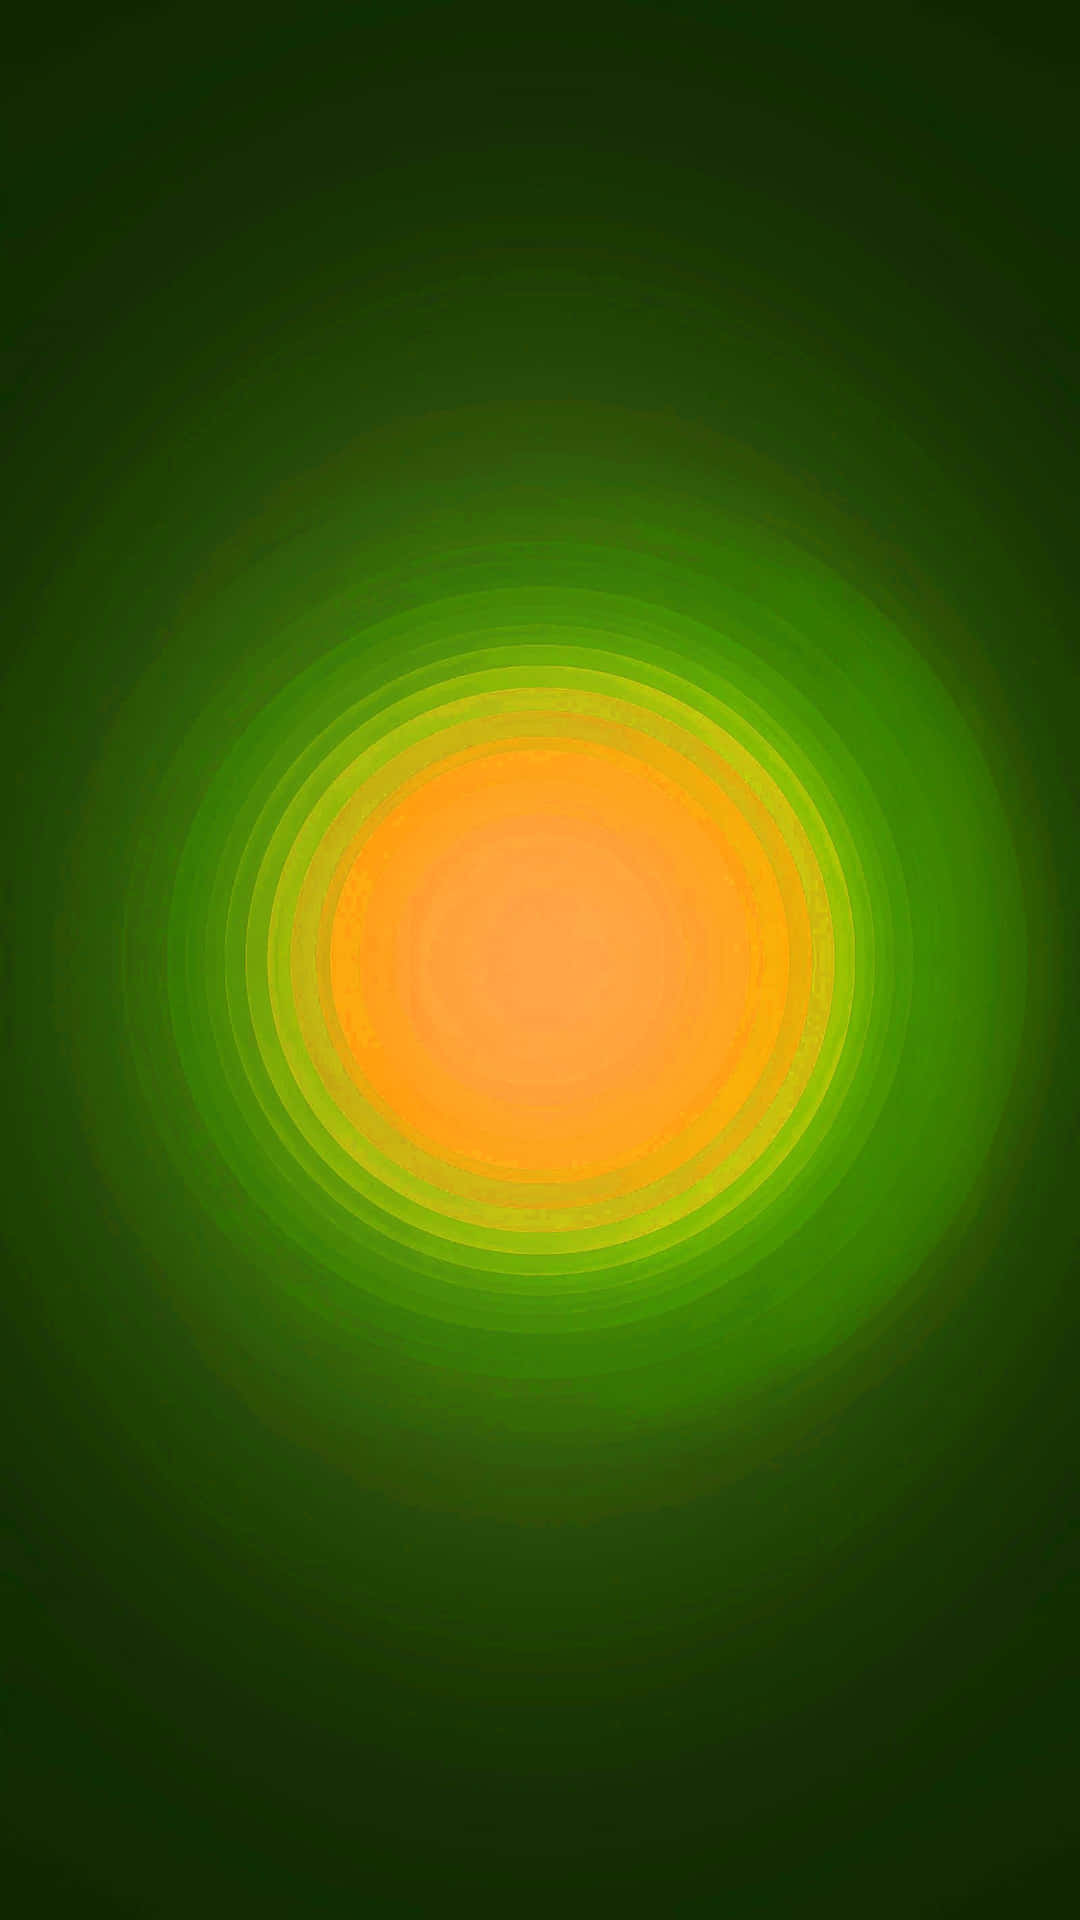 Abstract Green Yellow Gradient Concentric Circles Wallpaper